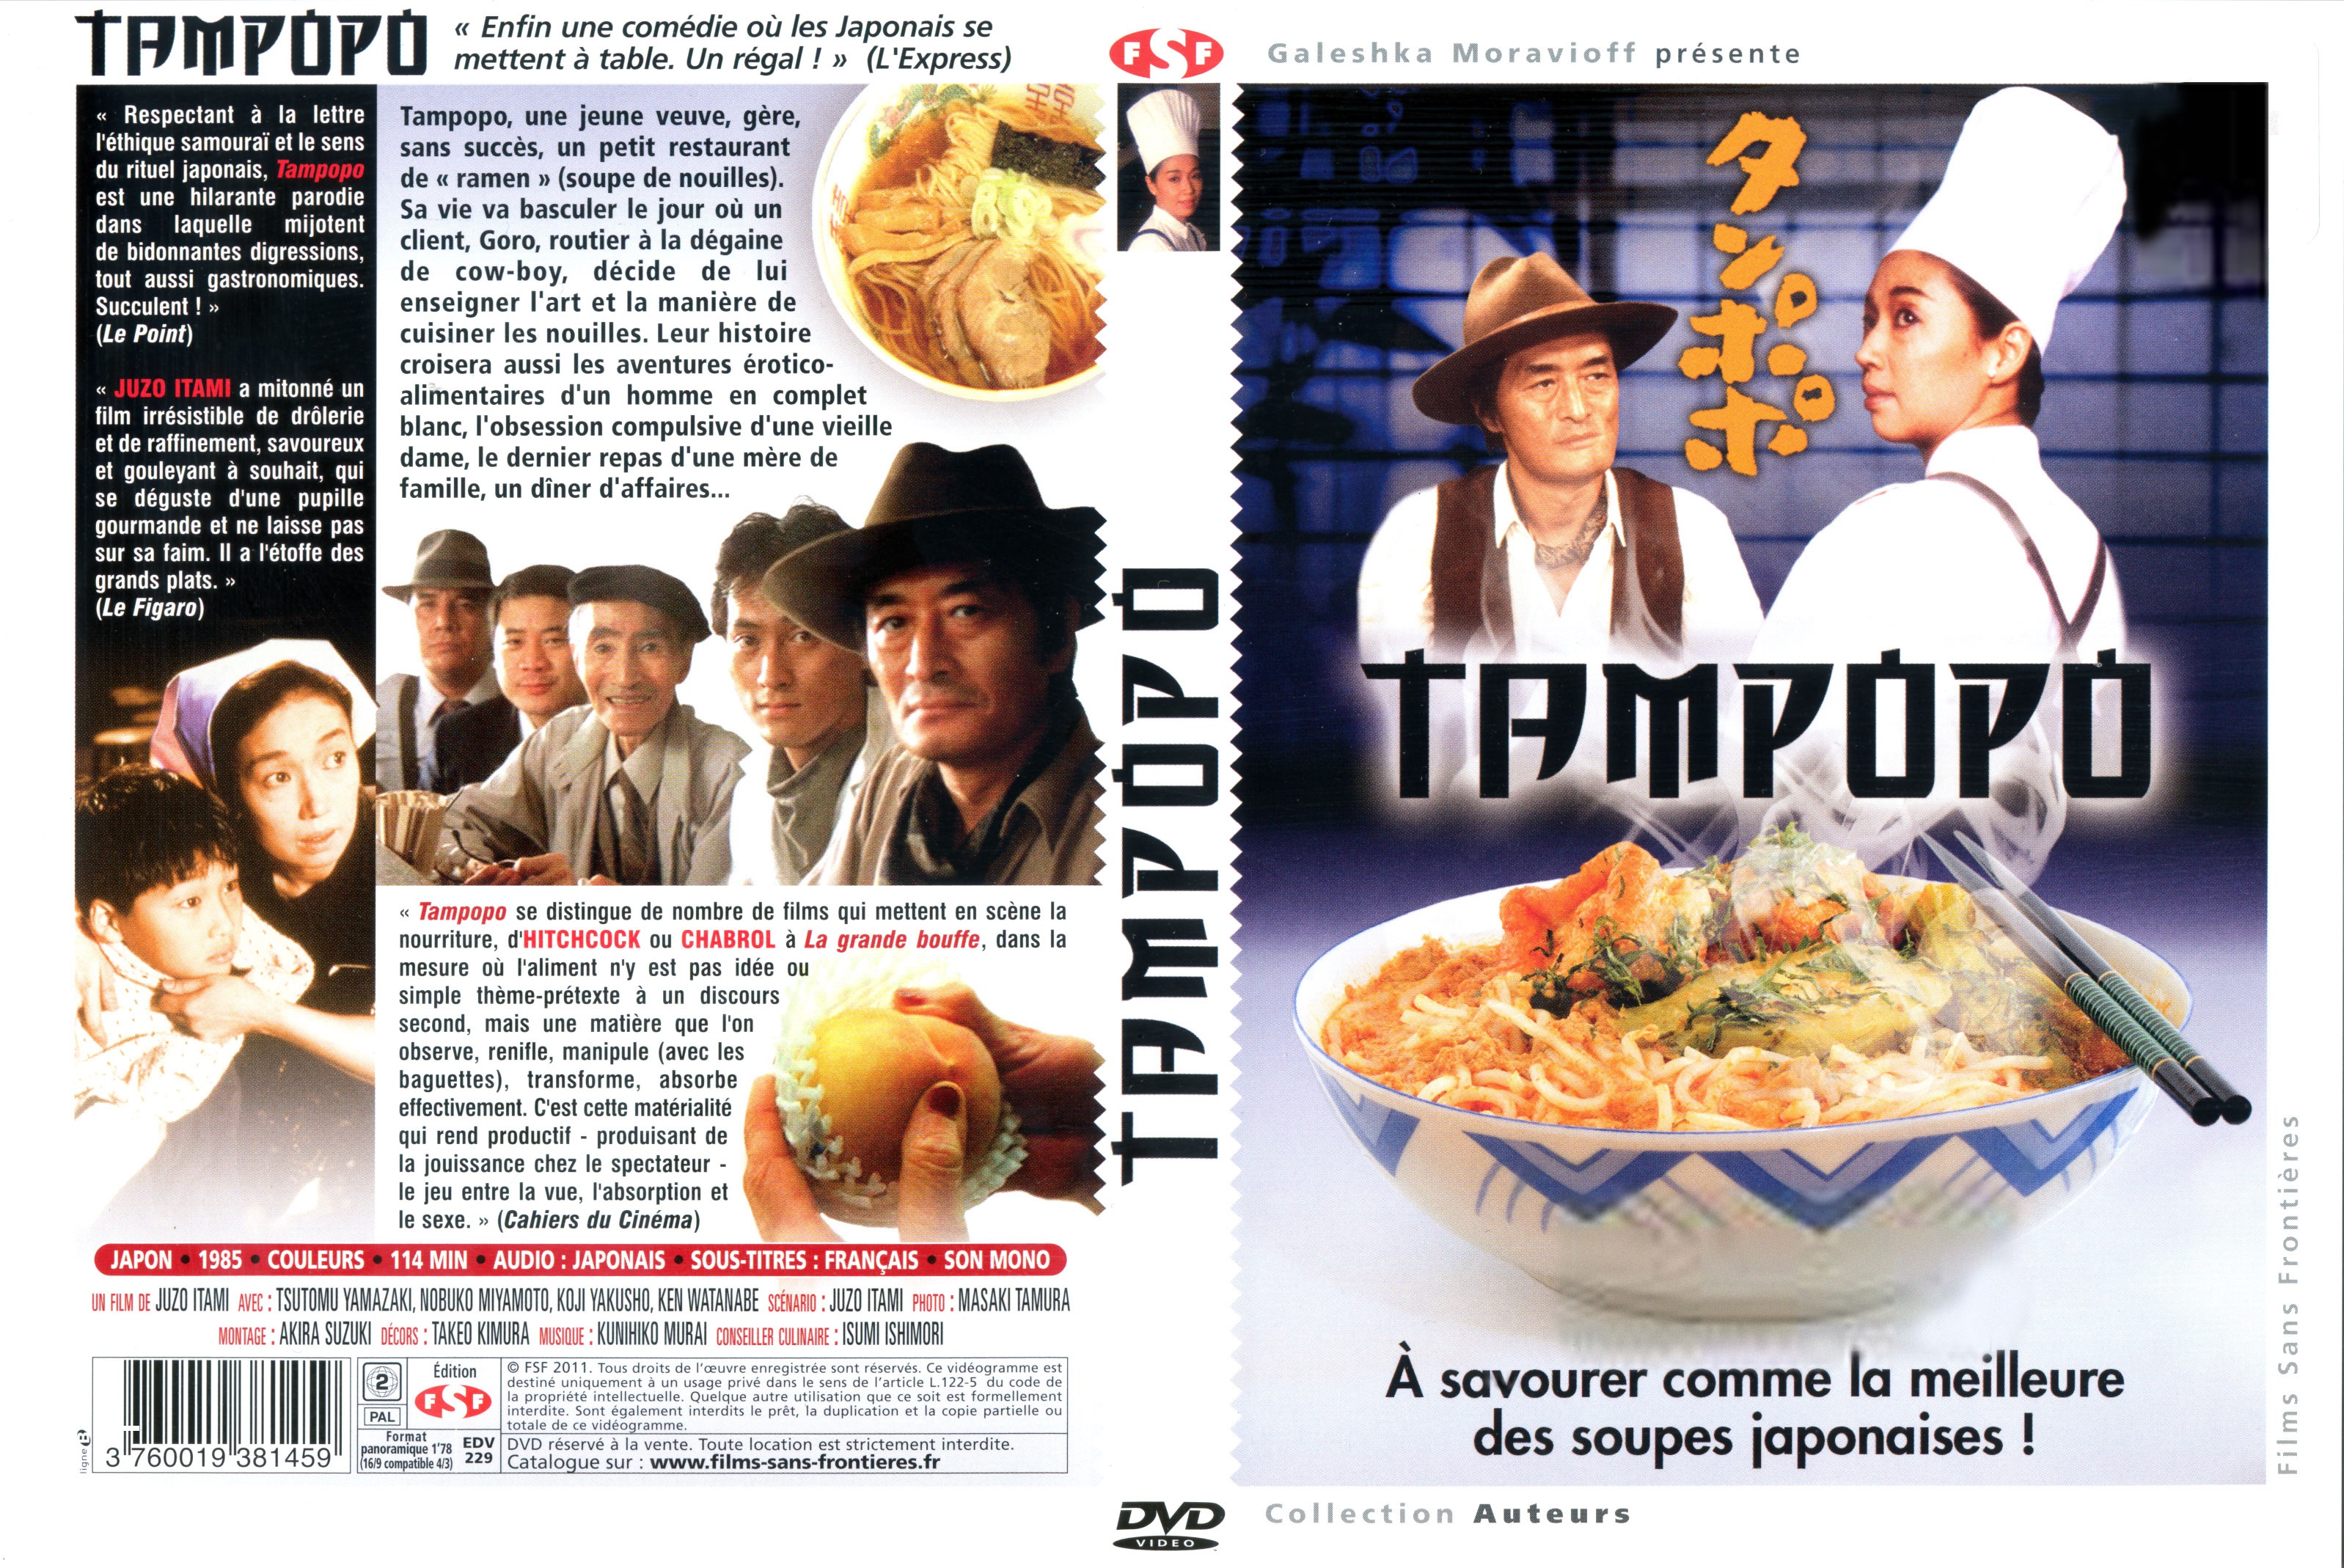 Jaquette DVD Tampopo